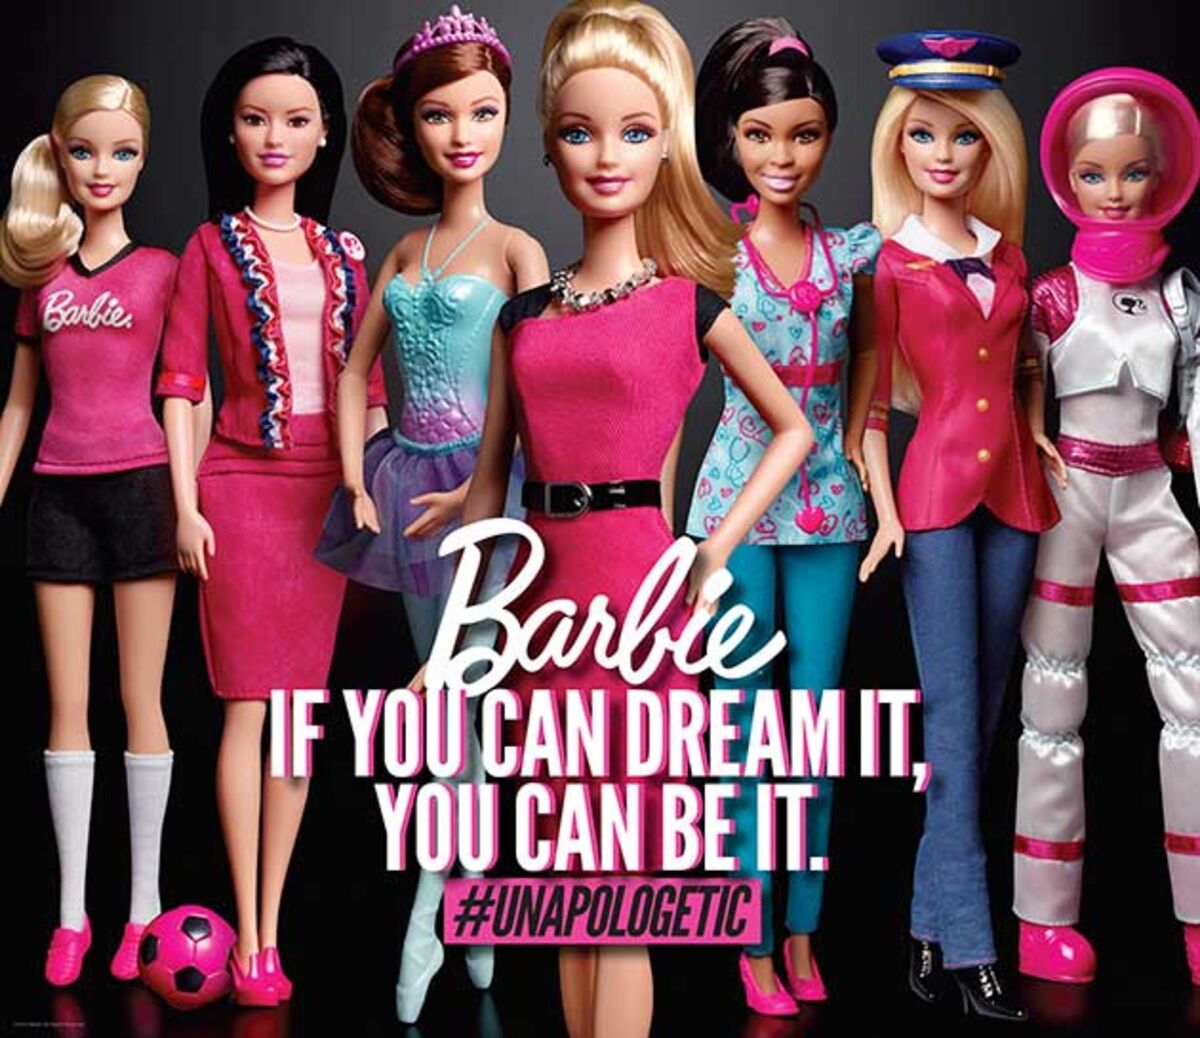 Barbie, With #Unapologetic Ads, In Just a Little Bit - Bloomberg